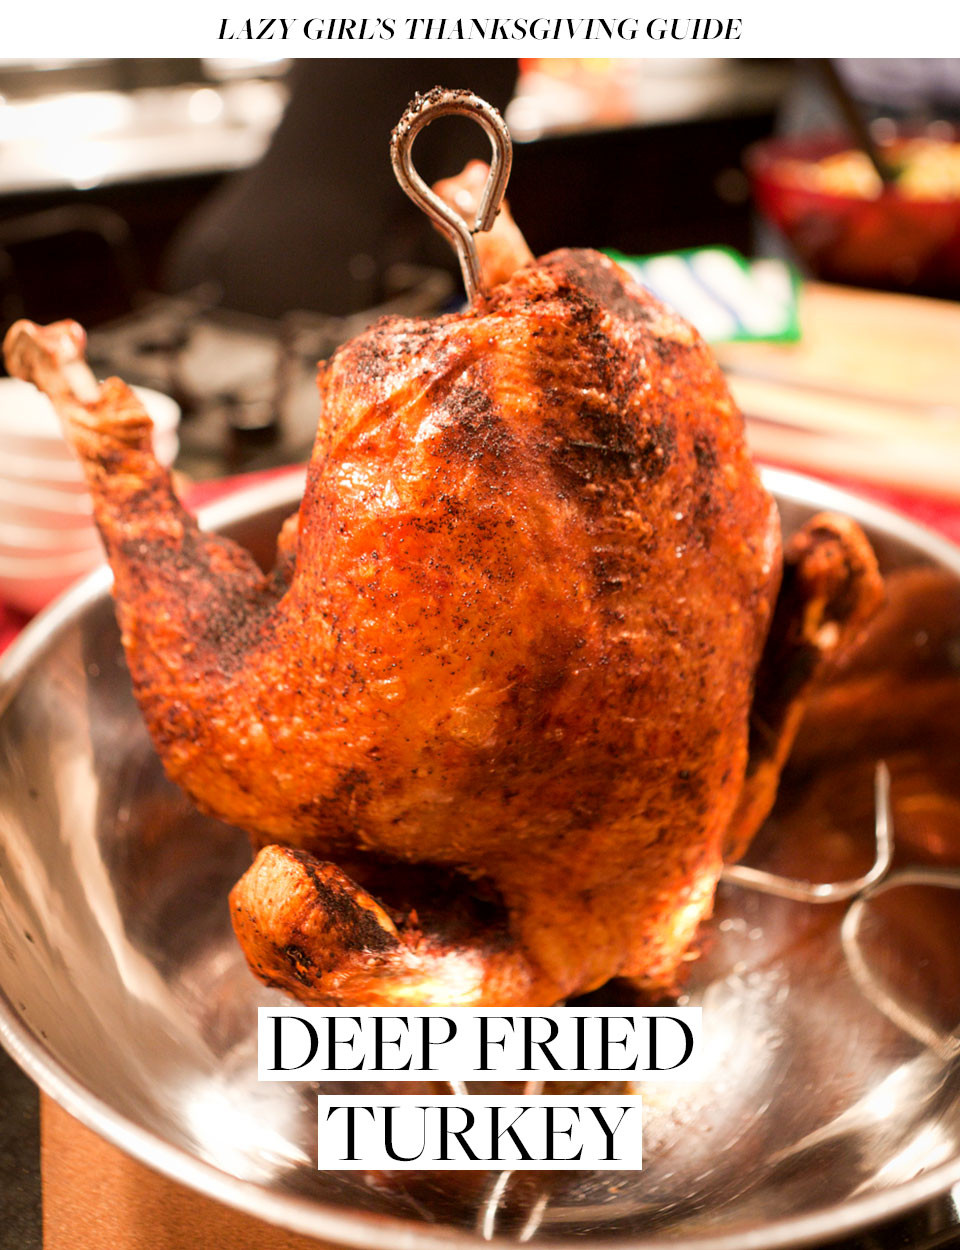 Deep Fried Whole Turkey
 Outsource Some of That Hectic Thanksgiving Cooking With